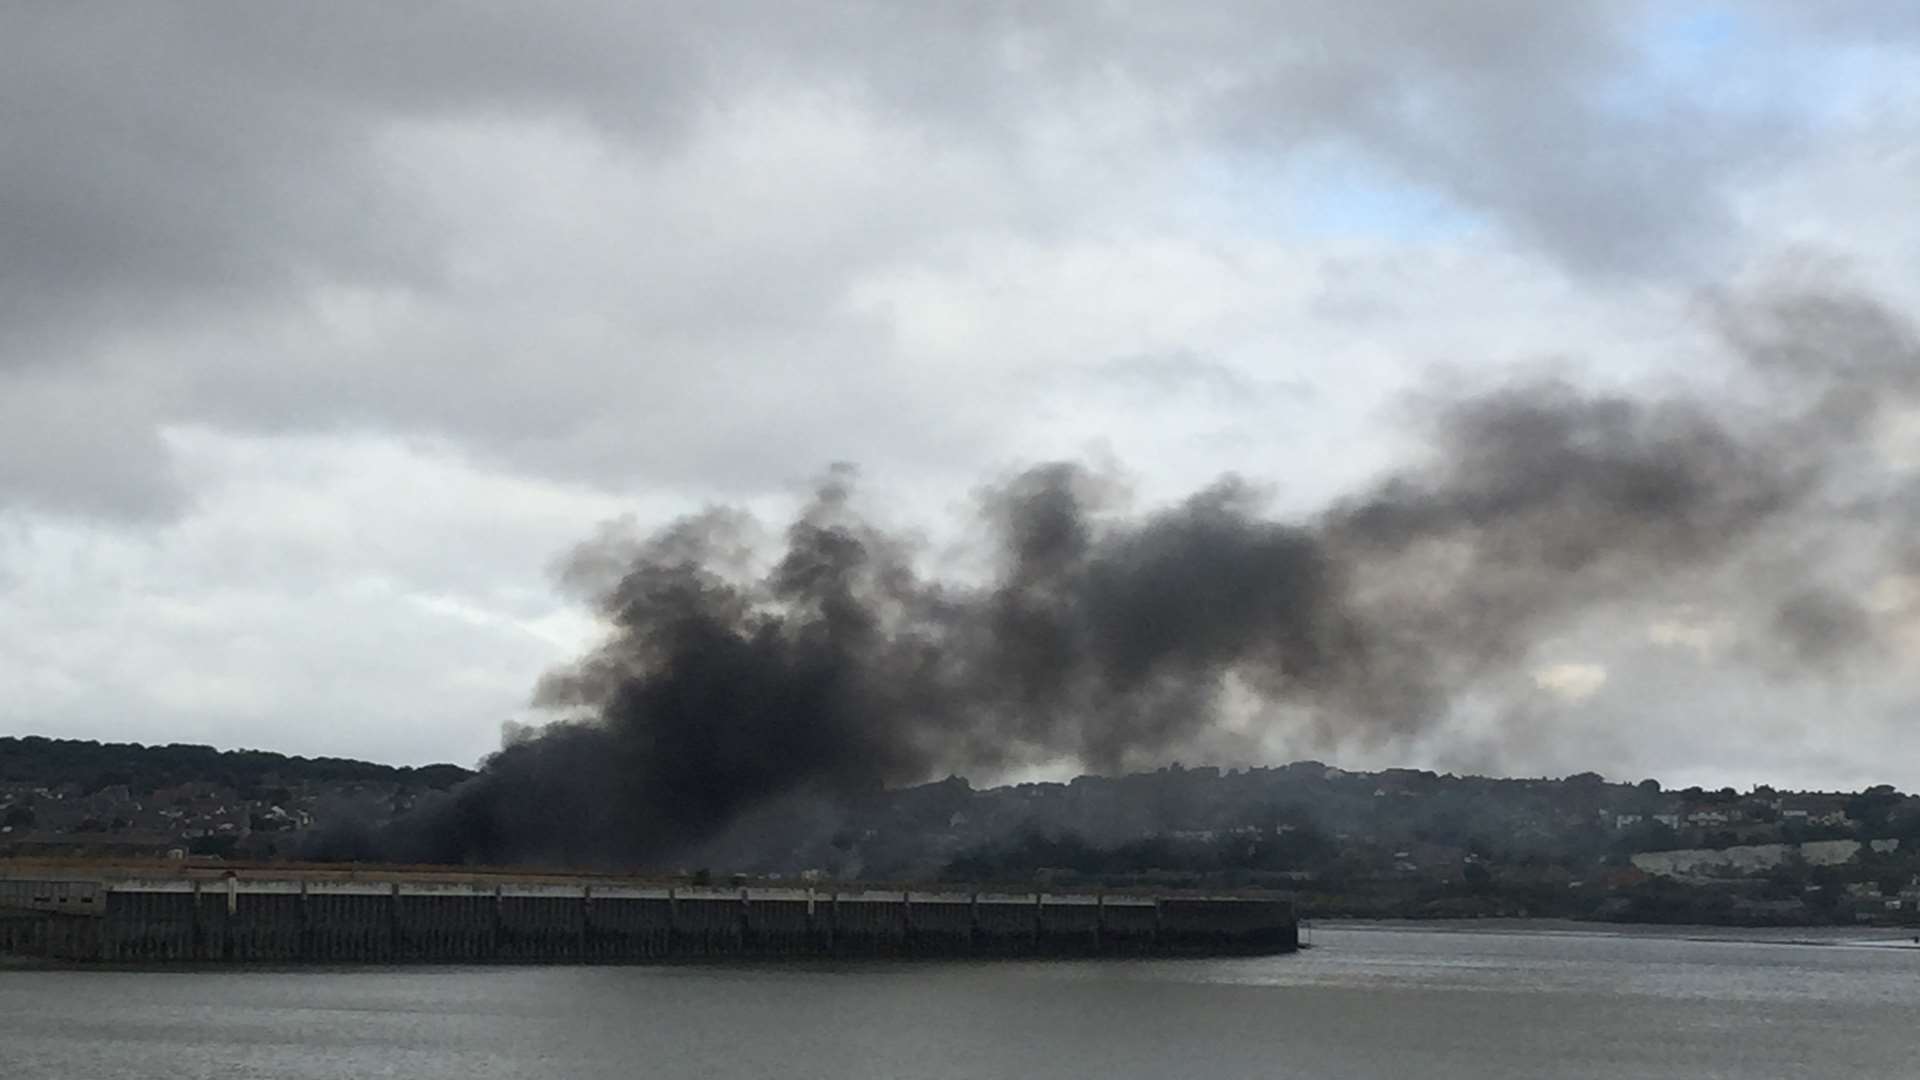 Fire at the Acorn ship yard in Rochester